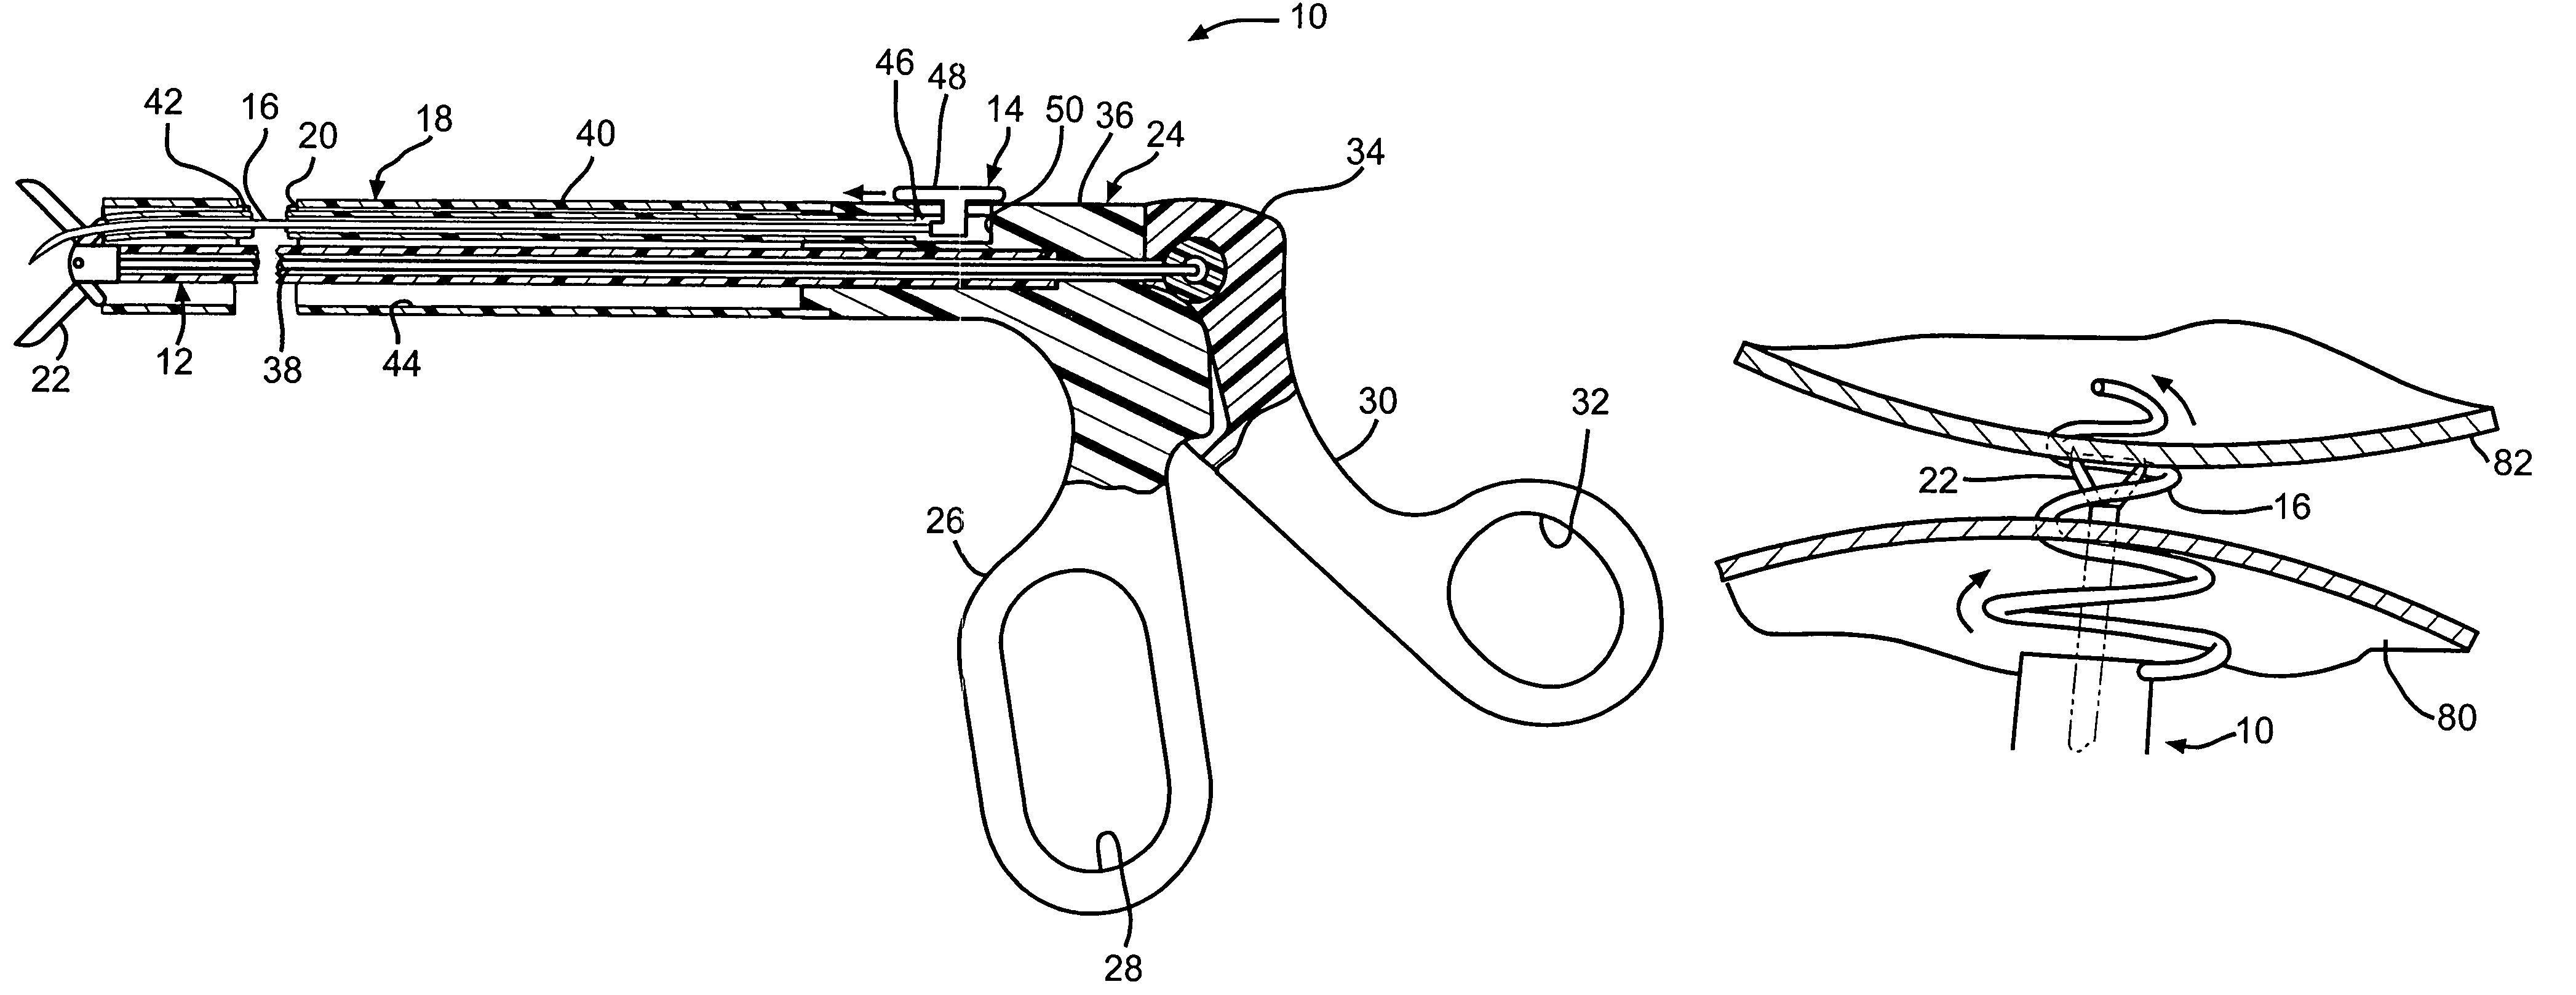 Device and method for intralumenal anastomosis